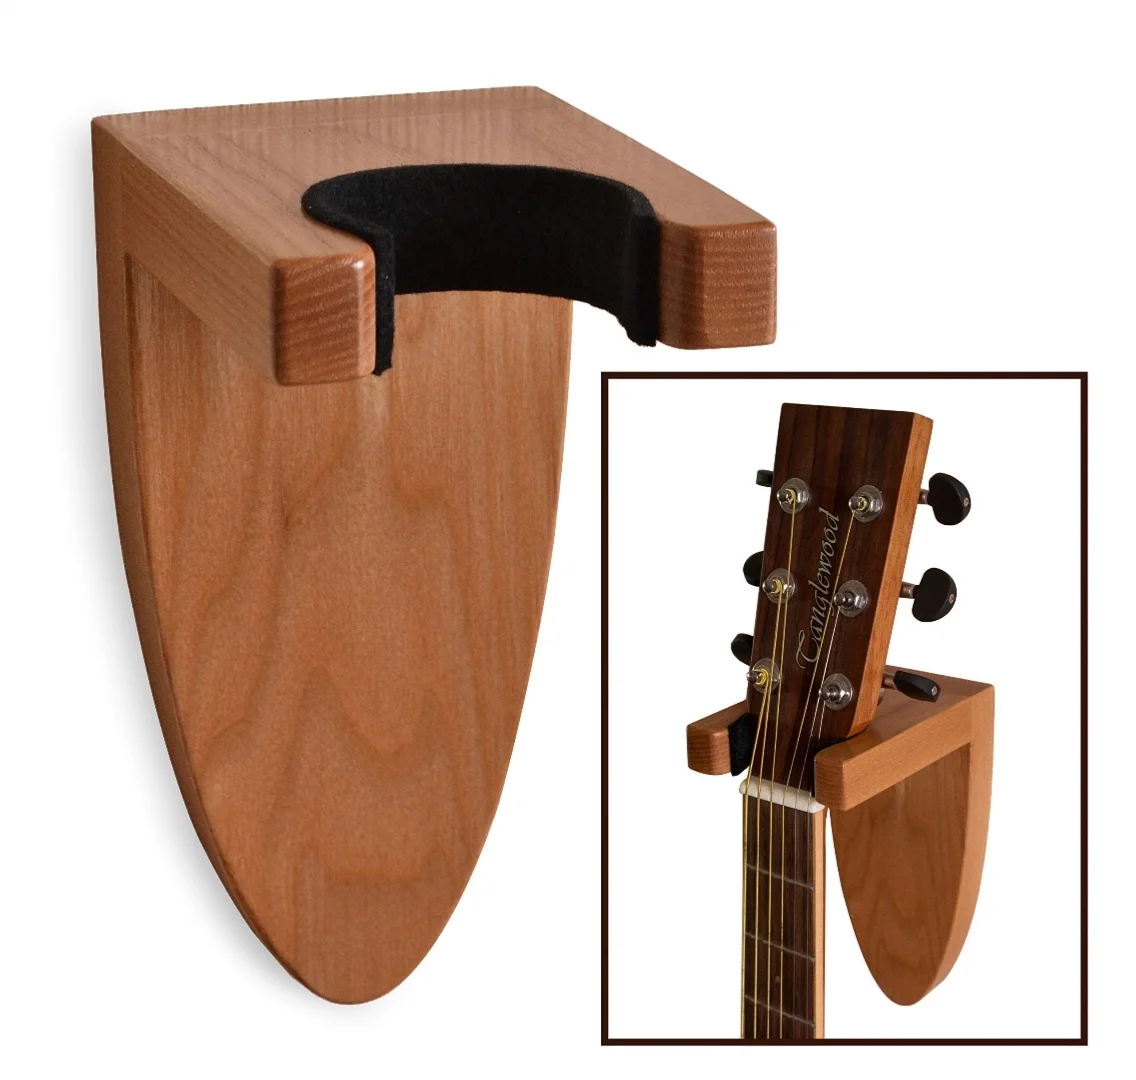 Guitar Wall Hanger Stands Ukulele Wall Mount Violin Wall Hook Keep Holder Mount Display Bioamy Guitar Wall Stand Rack Bracket Most Guitar Bass Accessories Easy To Install wooden 